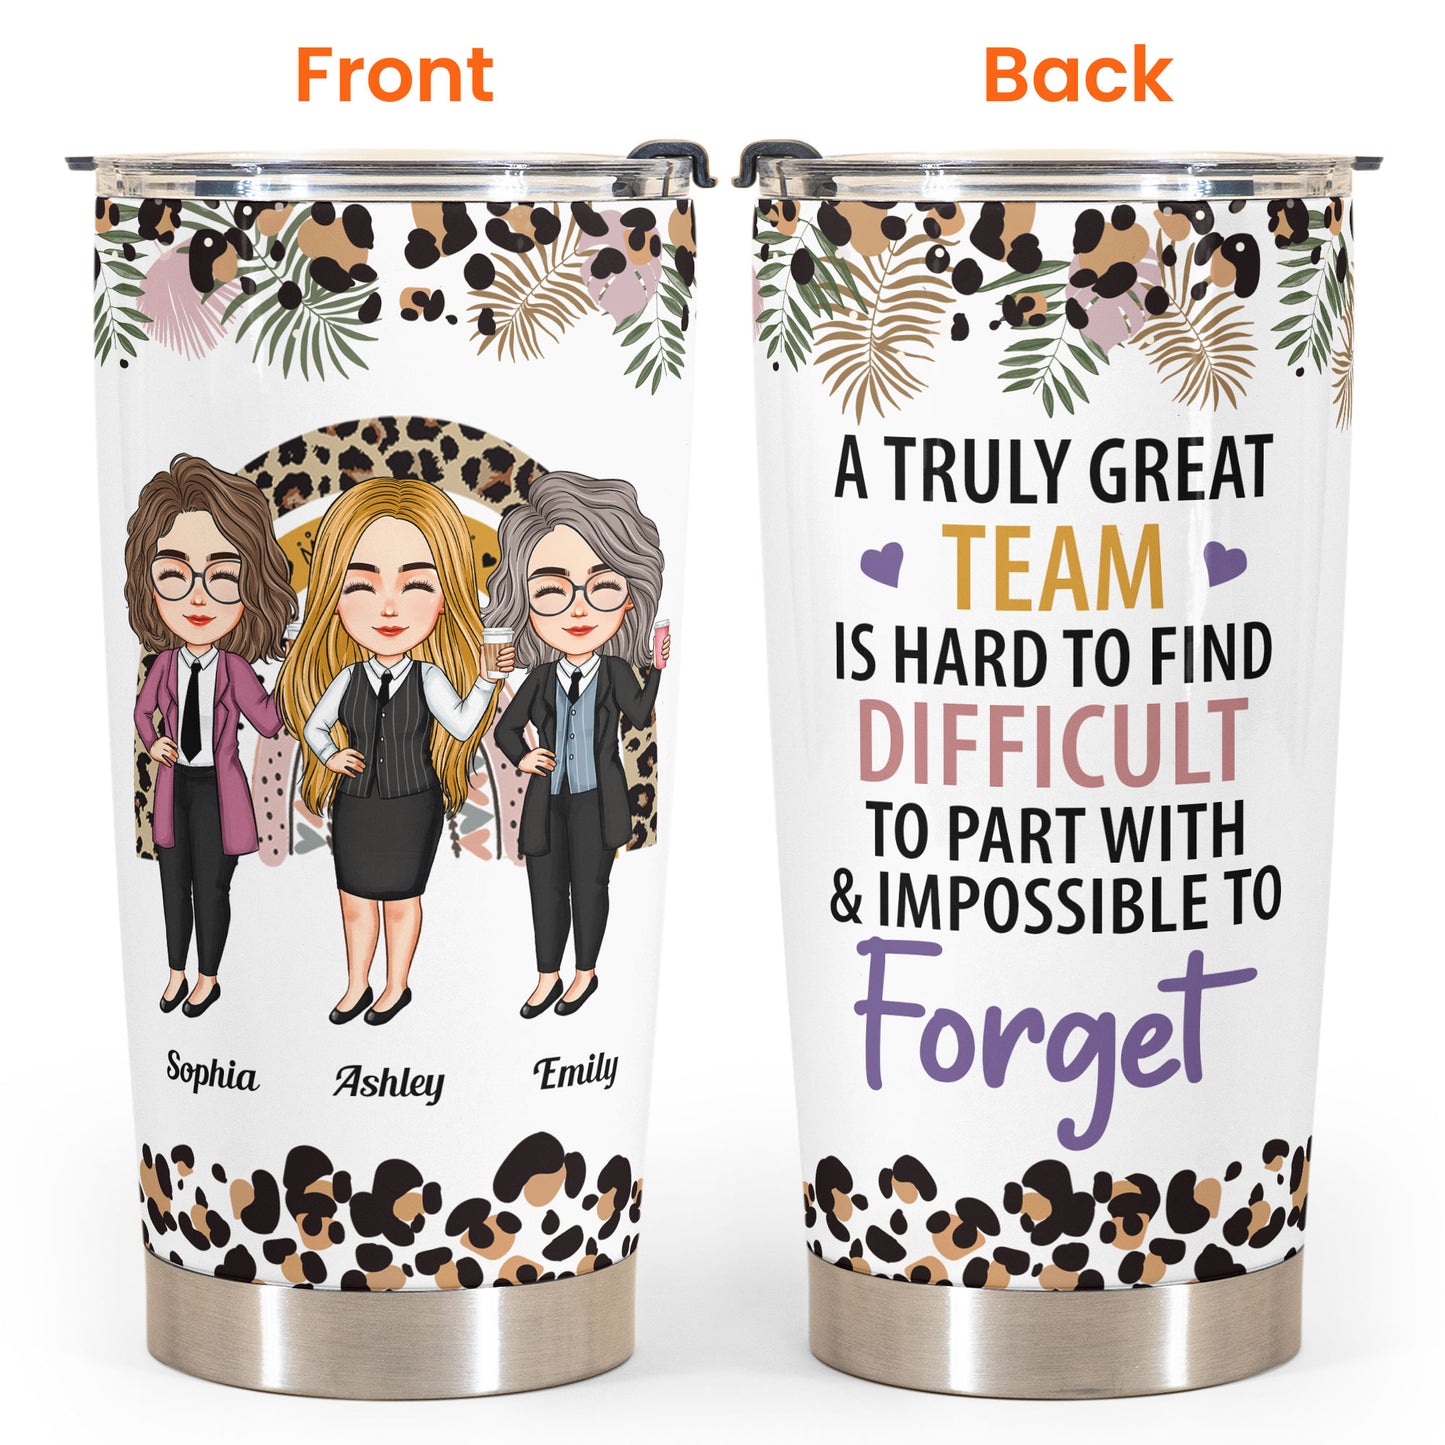 A Truly Great Team Is Hard To Find - Personalized Tumbler Cup - Christmas, Birthday, Leaving Gift For Colleagues, Coworkers, Work Friends